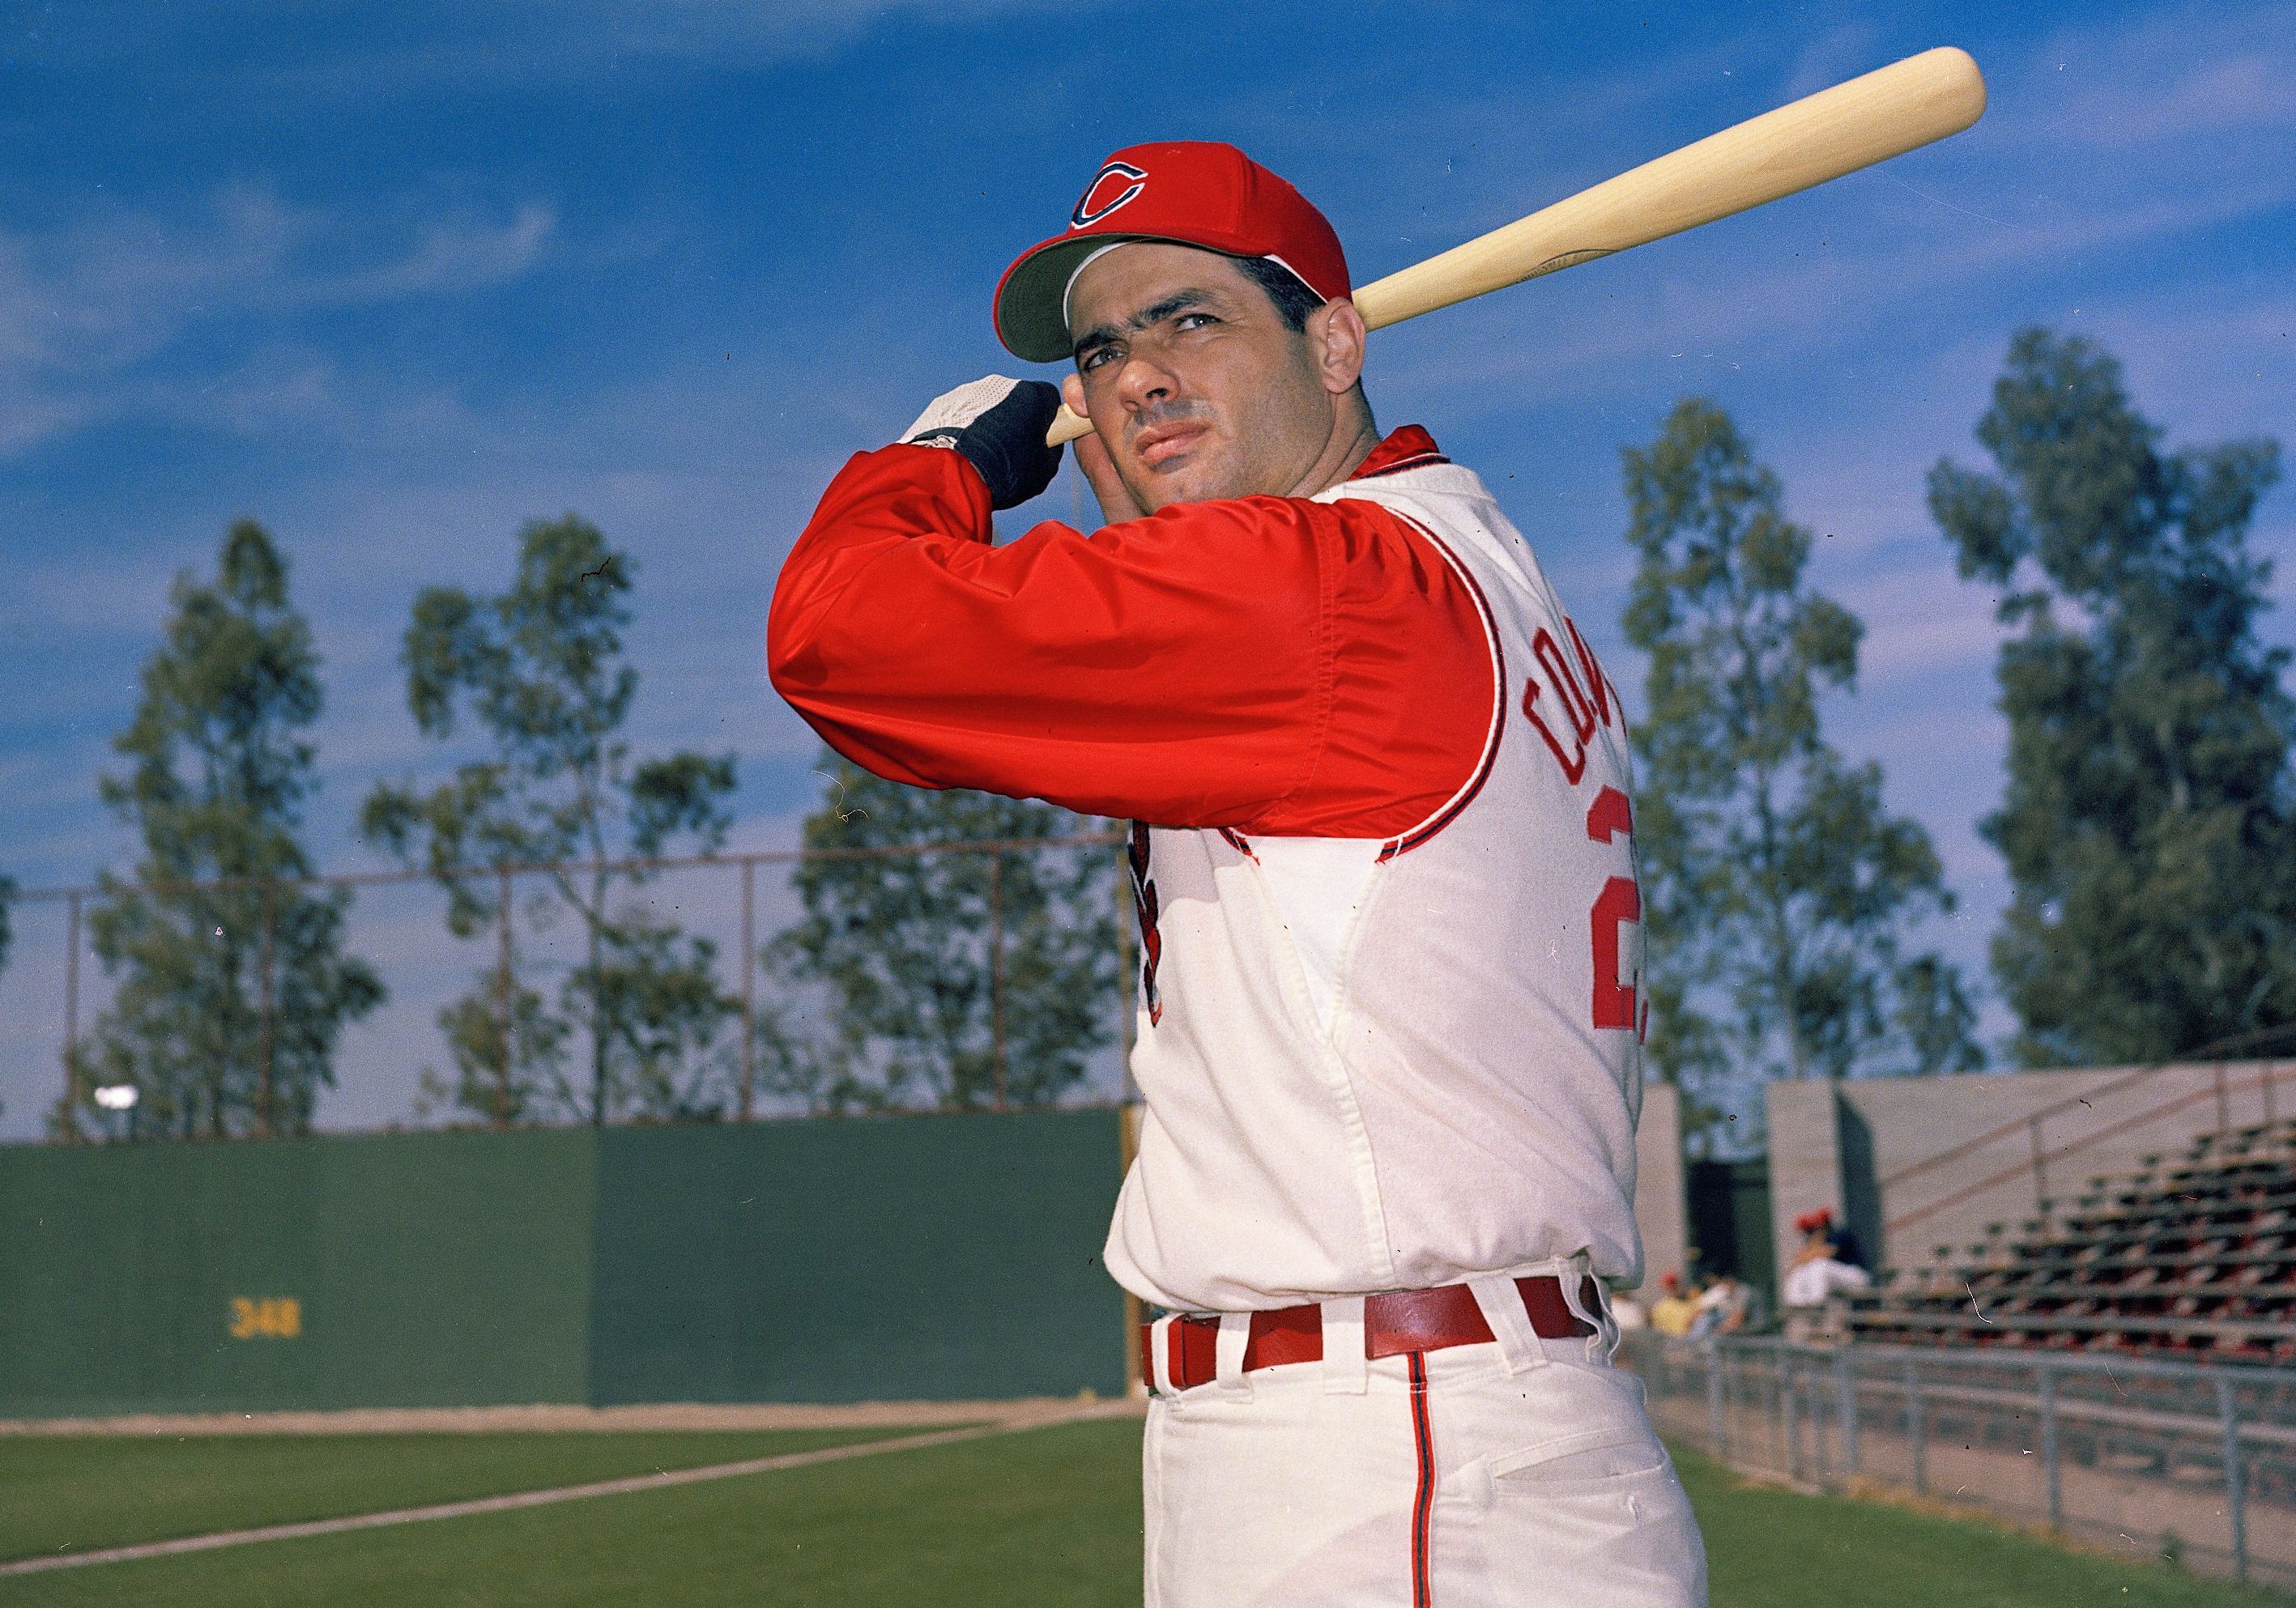 Rocky Colavito: I was shocked that I was traded to the Tigers